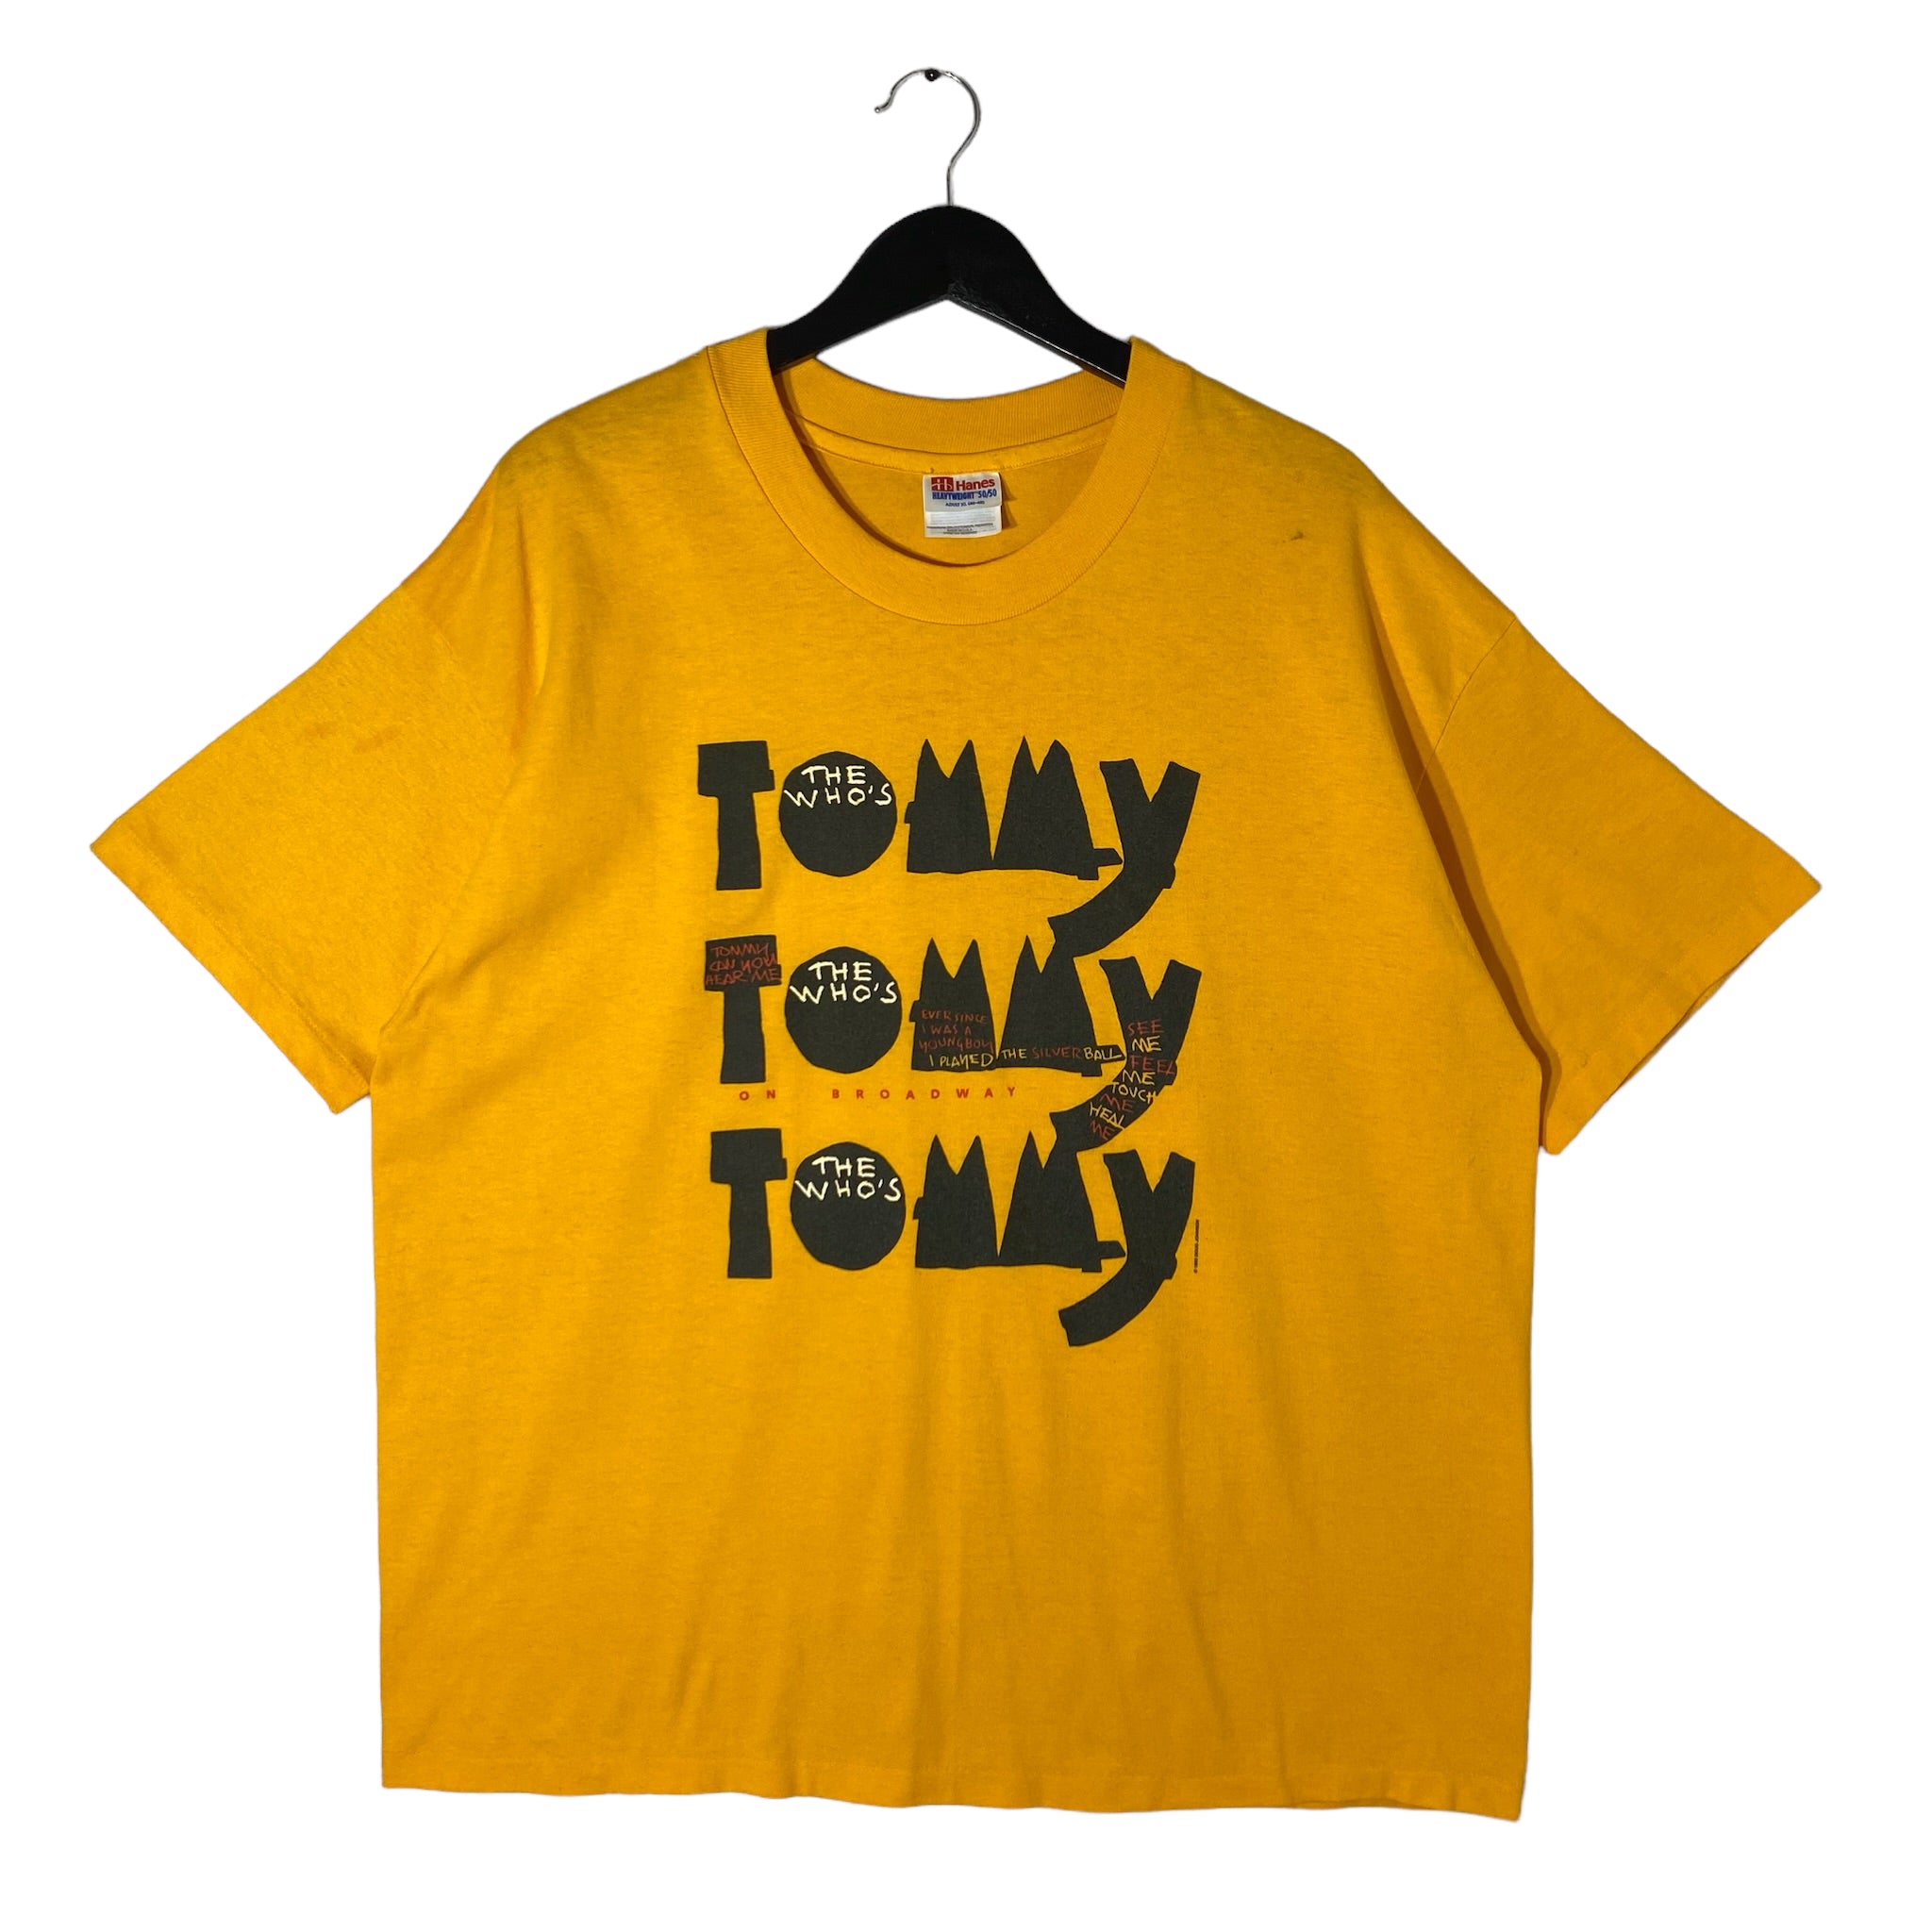 Vintage The Who's Tommy Broadway Tee